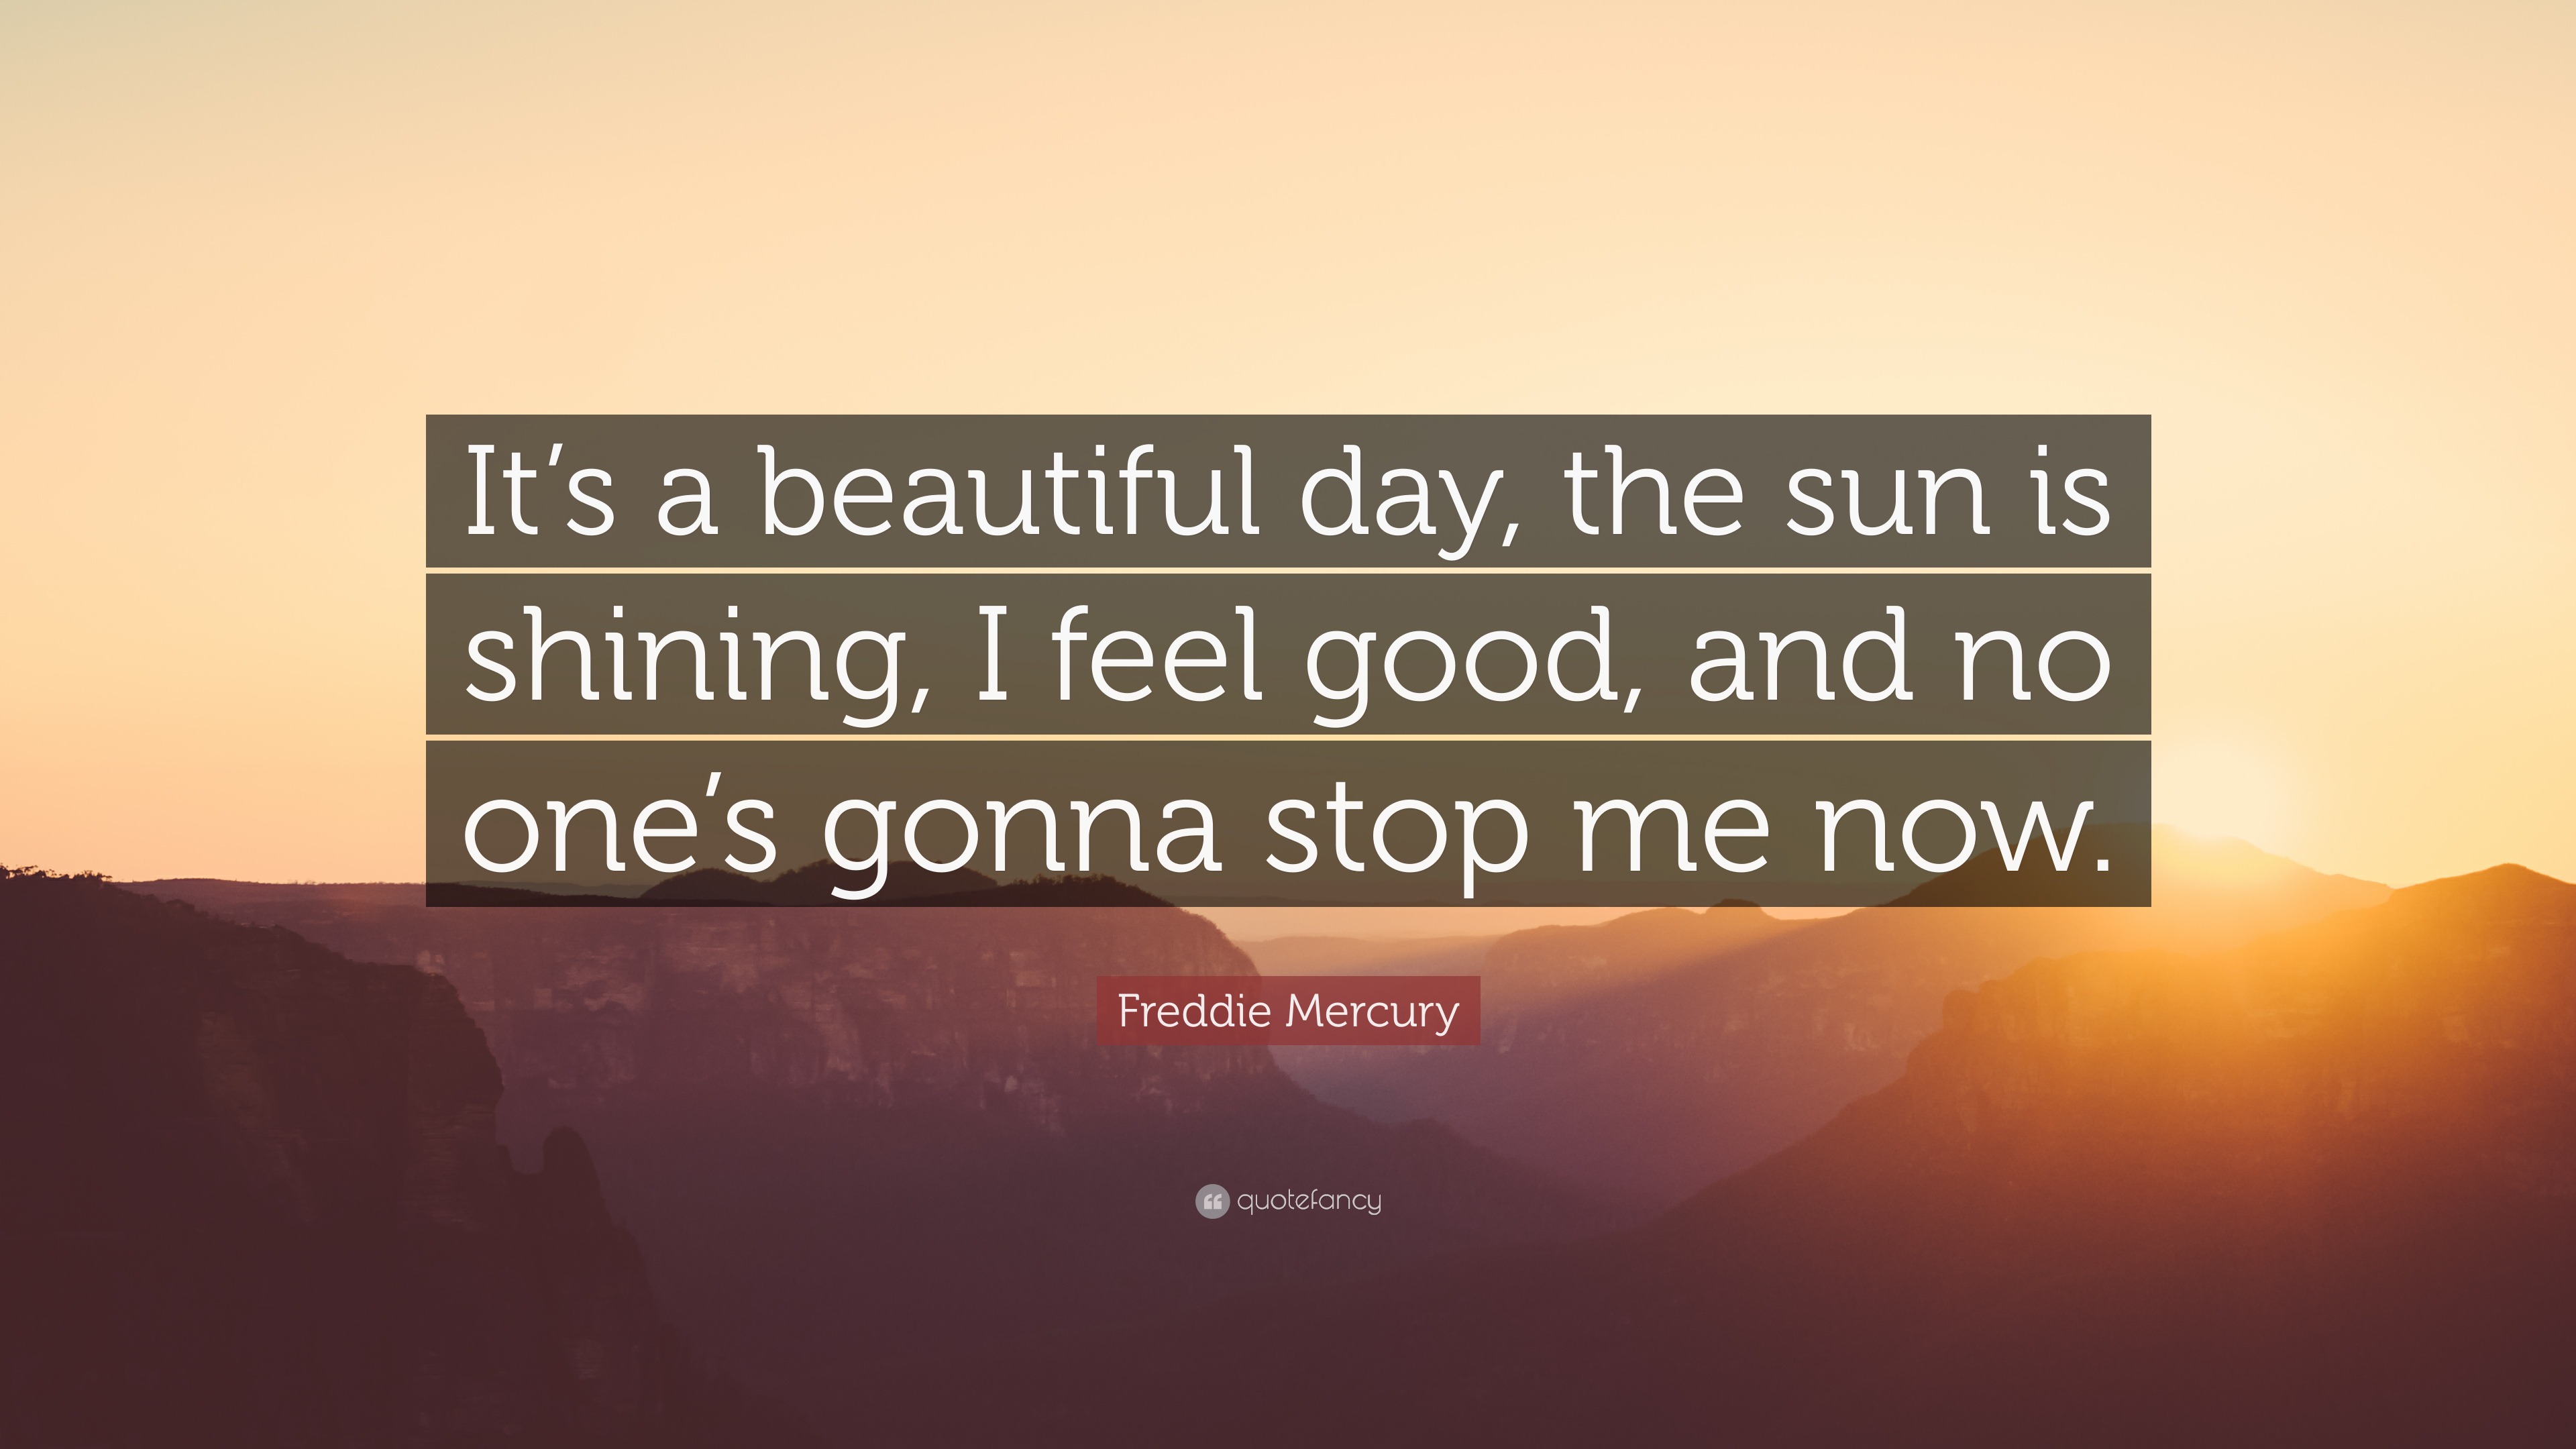 It's a Beautiful Day - song and lyrics by Heaven is Shining